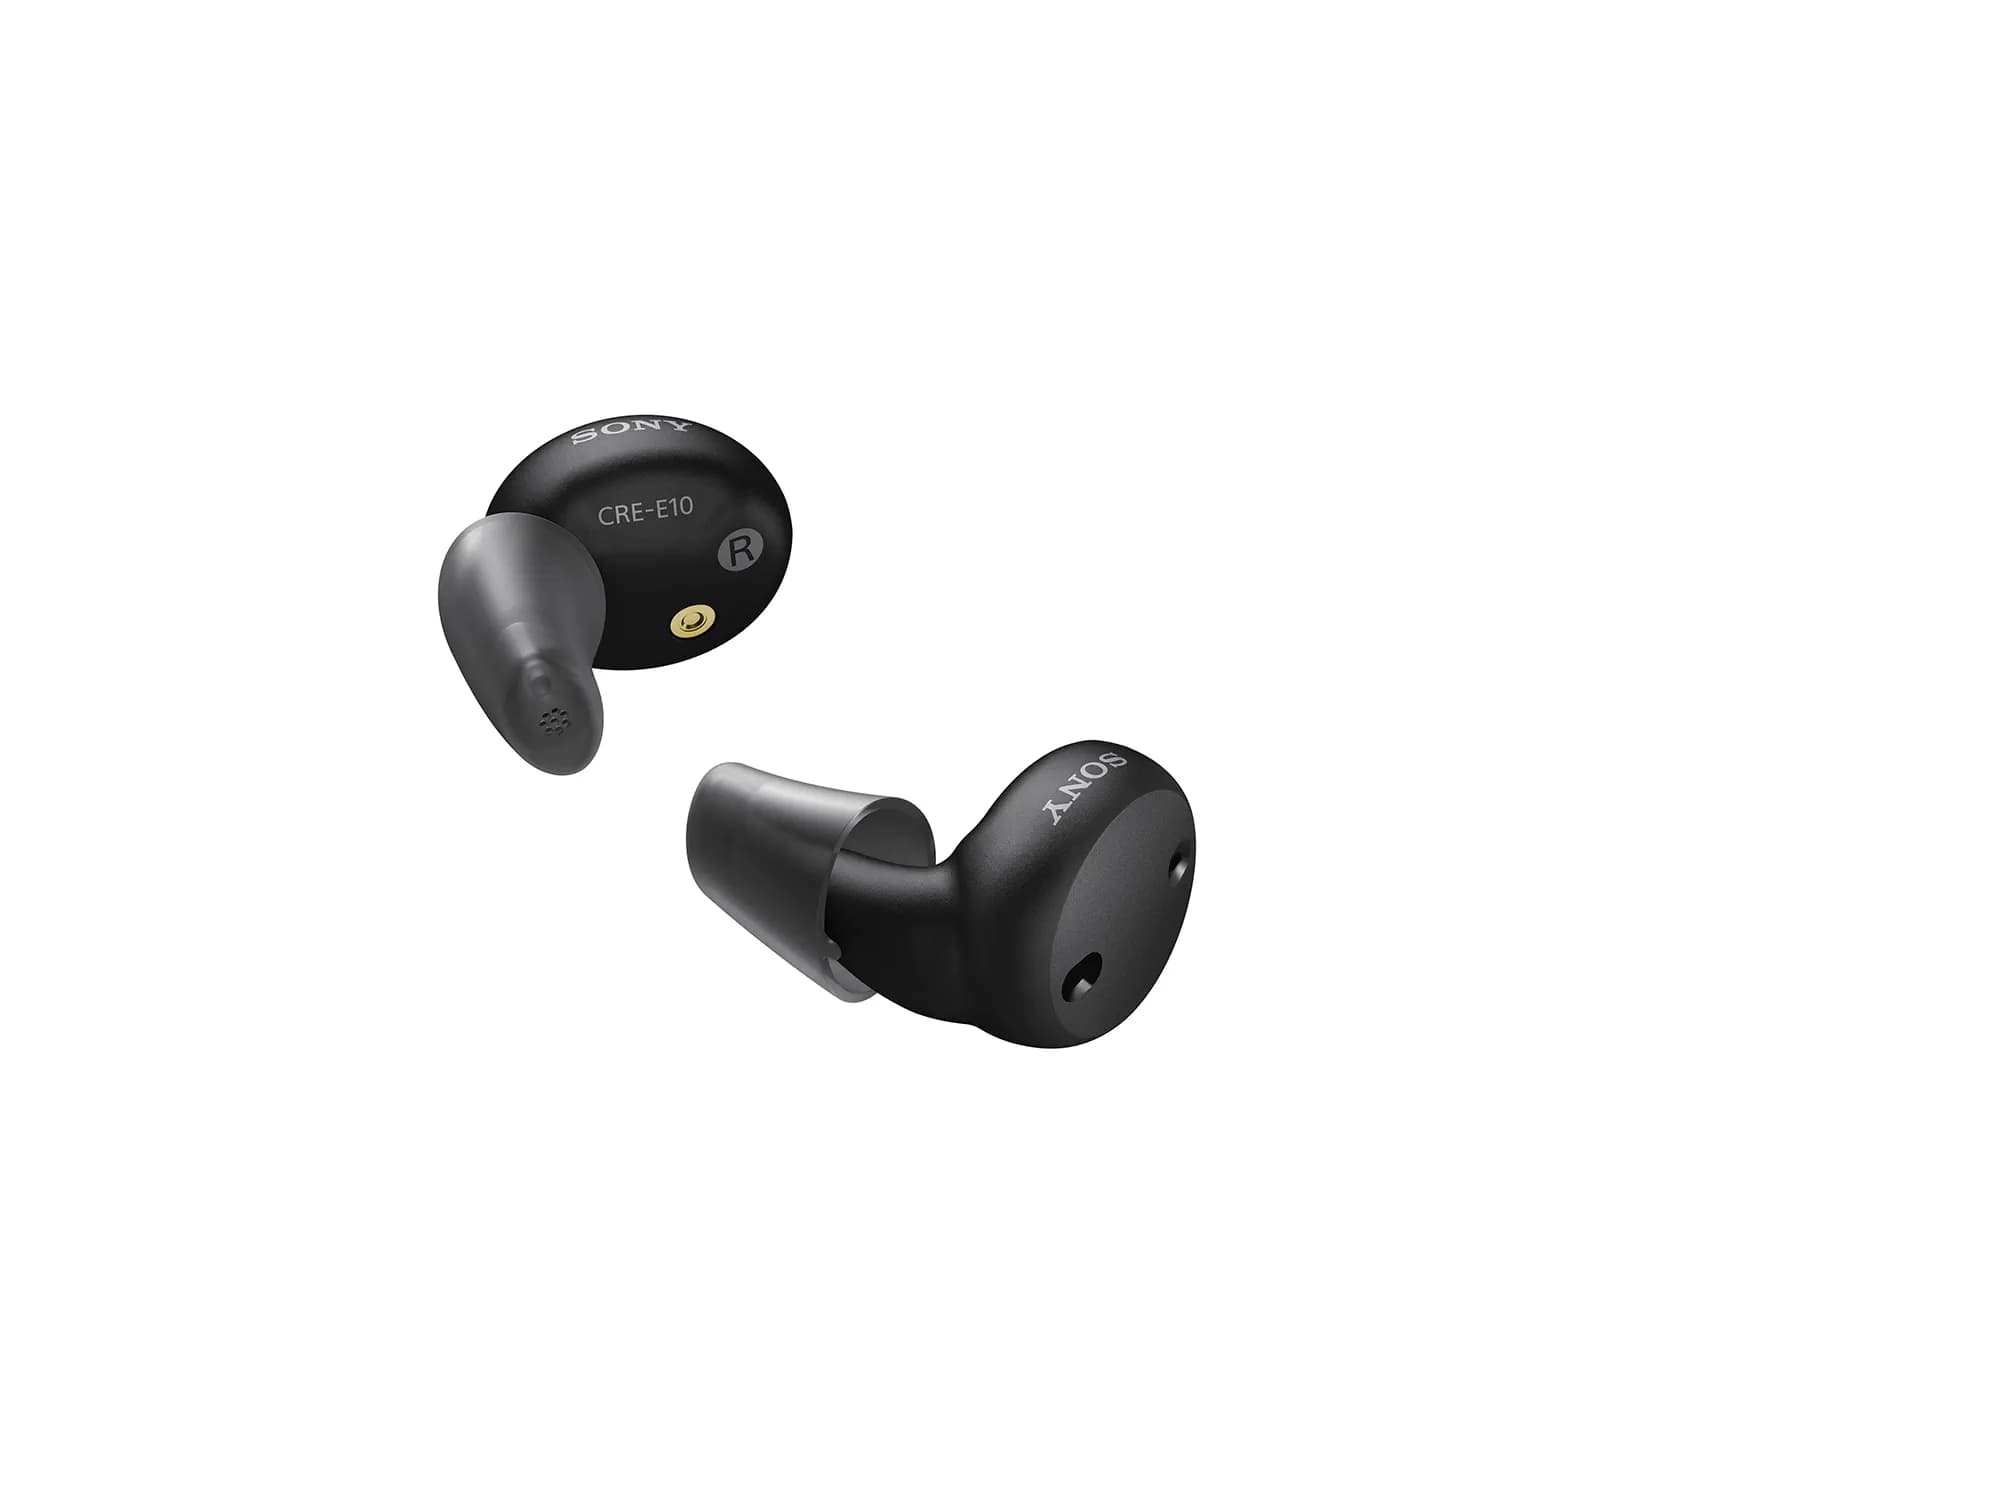 Sony's cre-e10 over-the-counter self-fitting earbud hearing aids.  FDA-registred medical device for your safety.